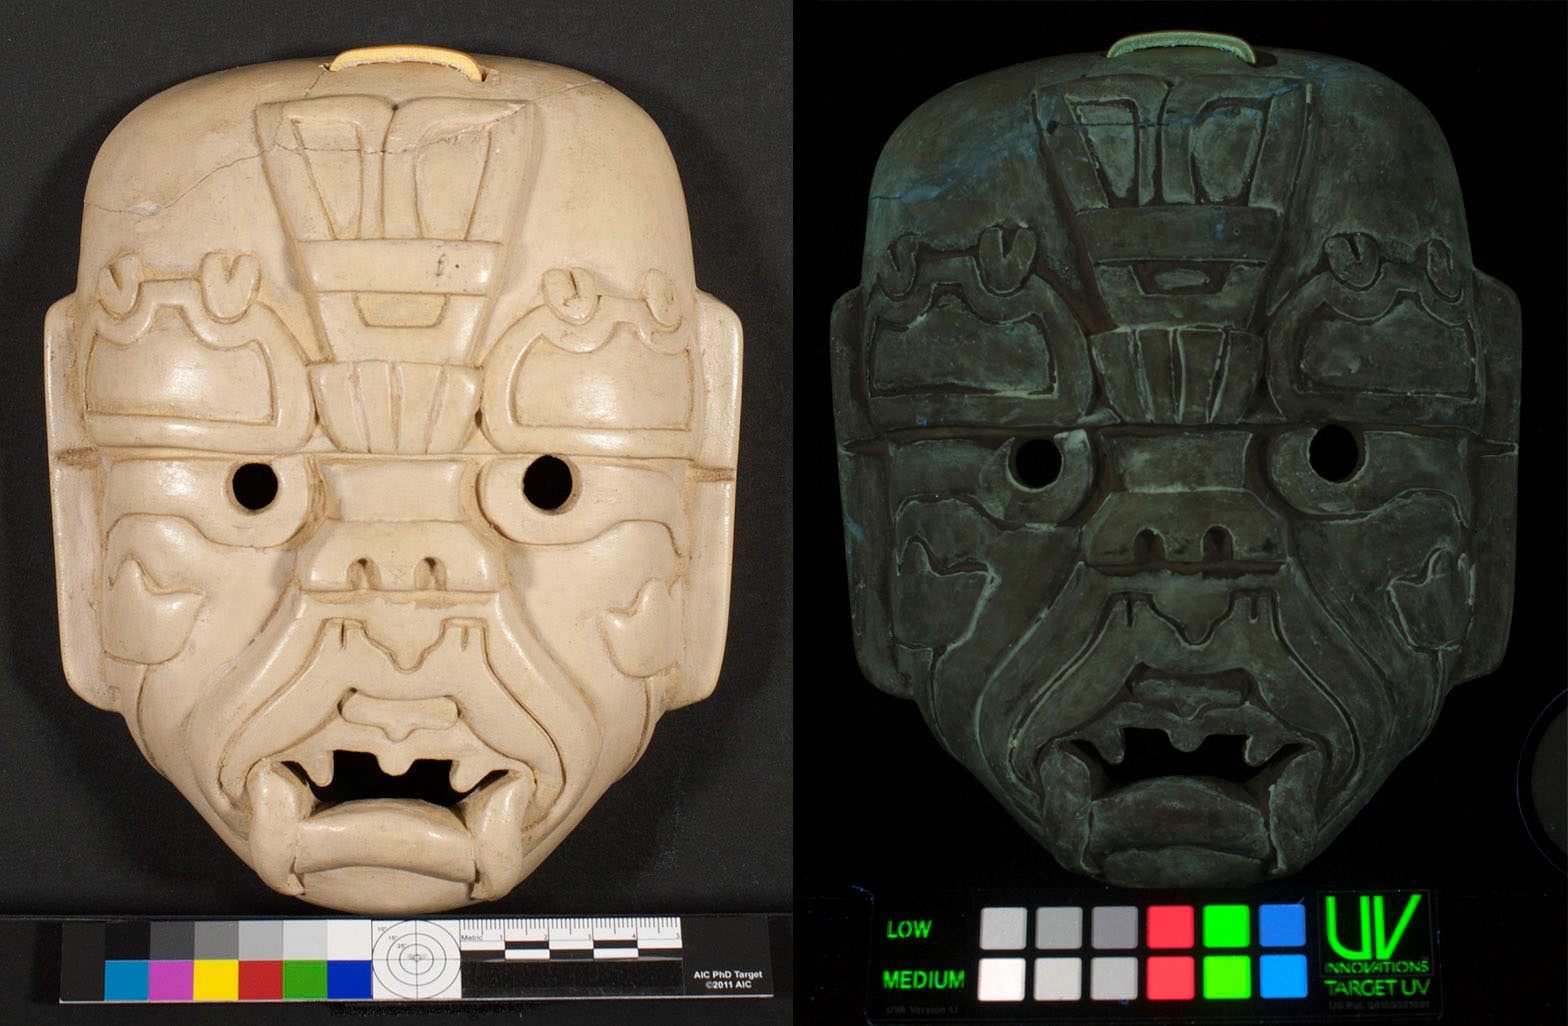 Left to right: South American mask seen in normal light  and UV-visible light